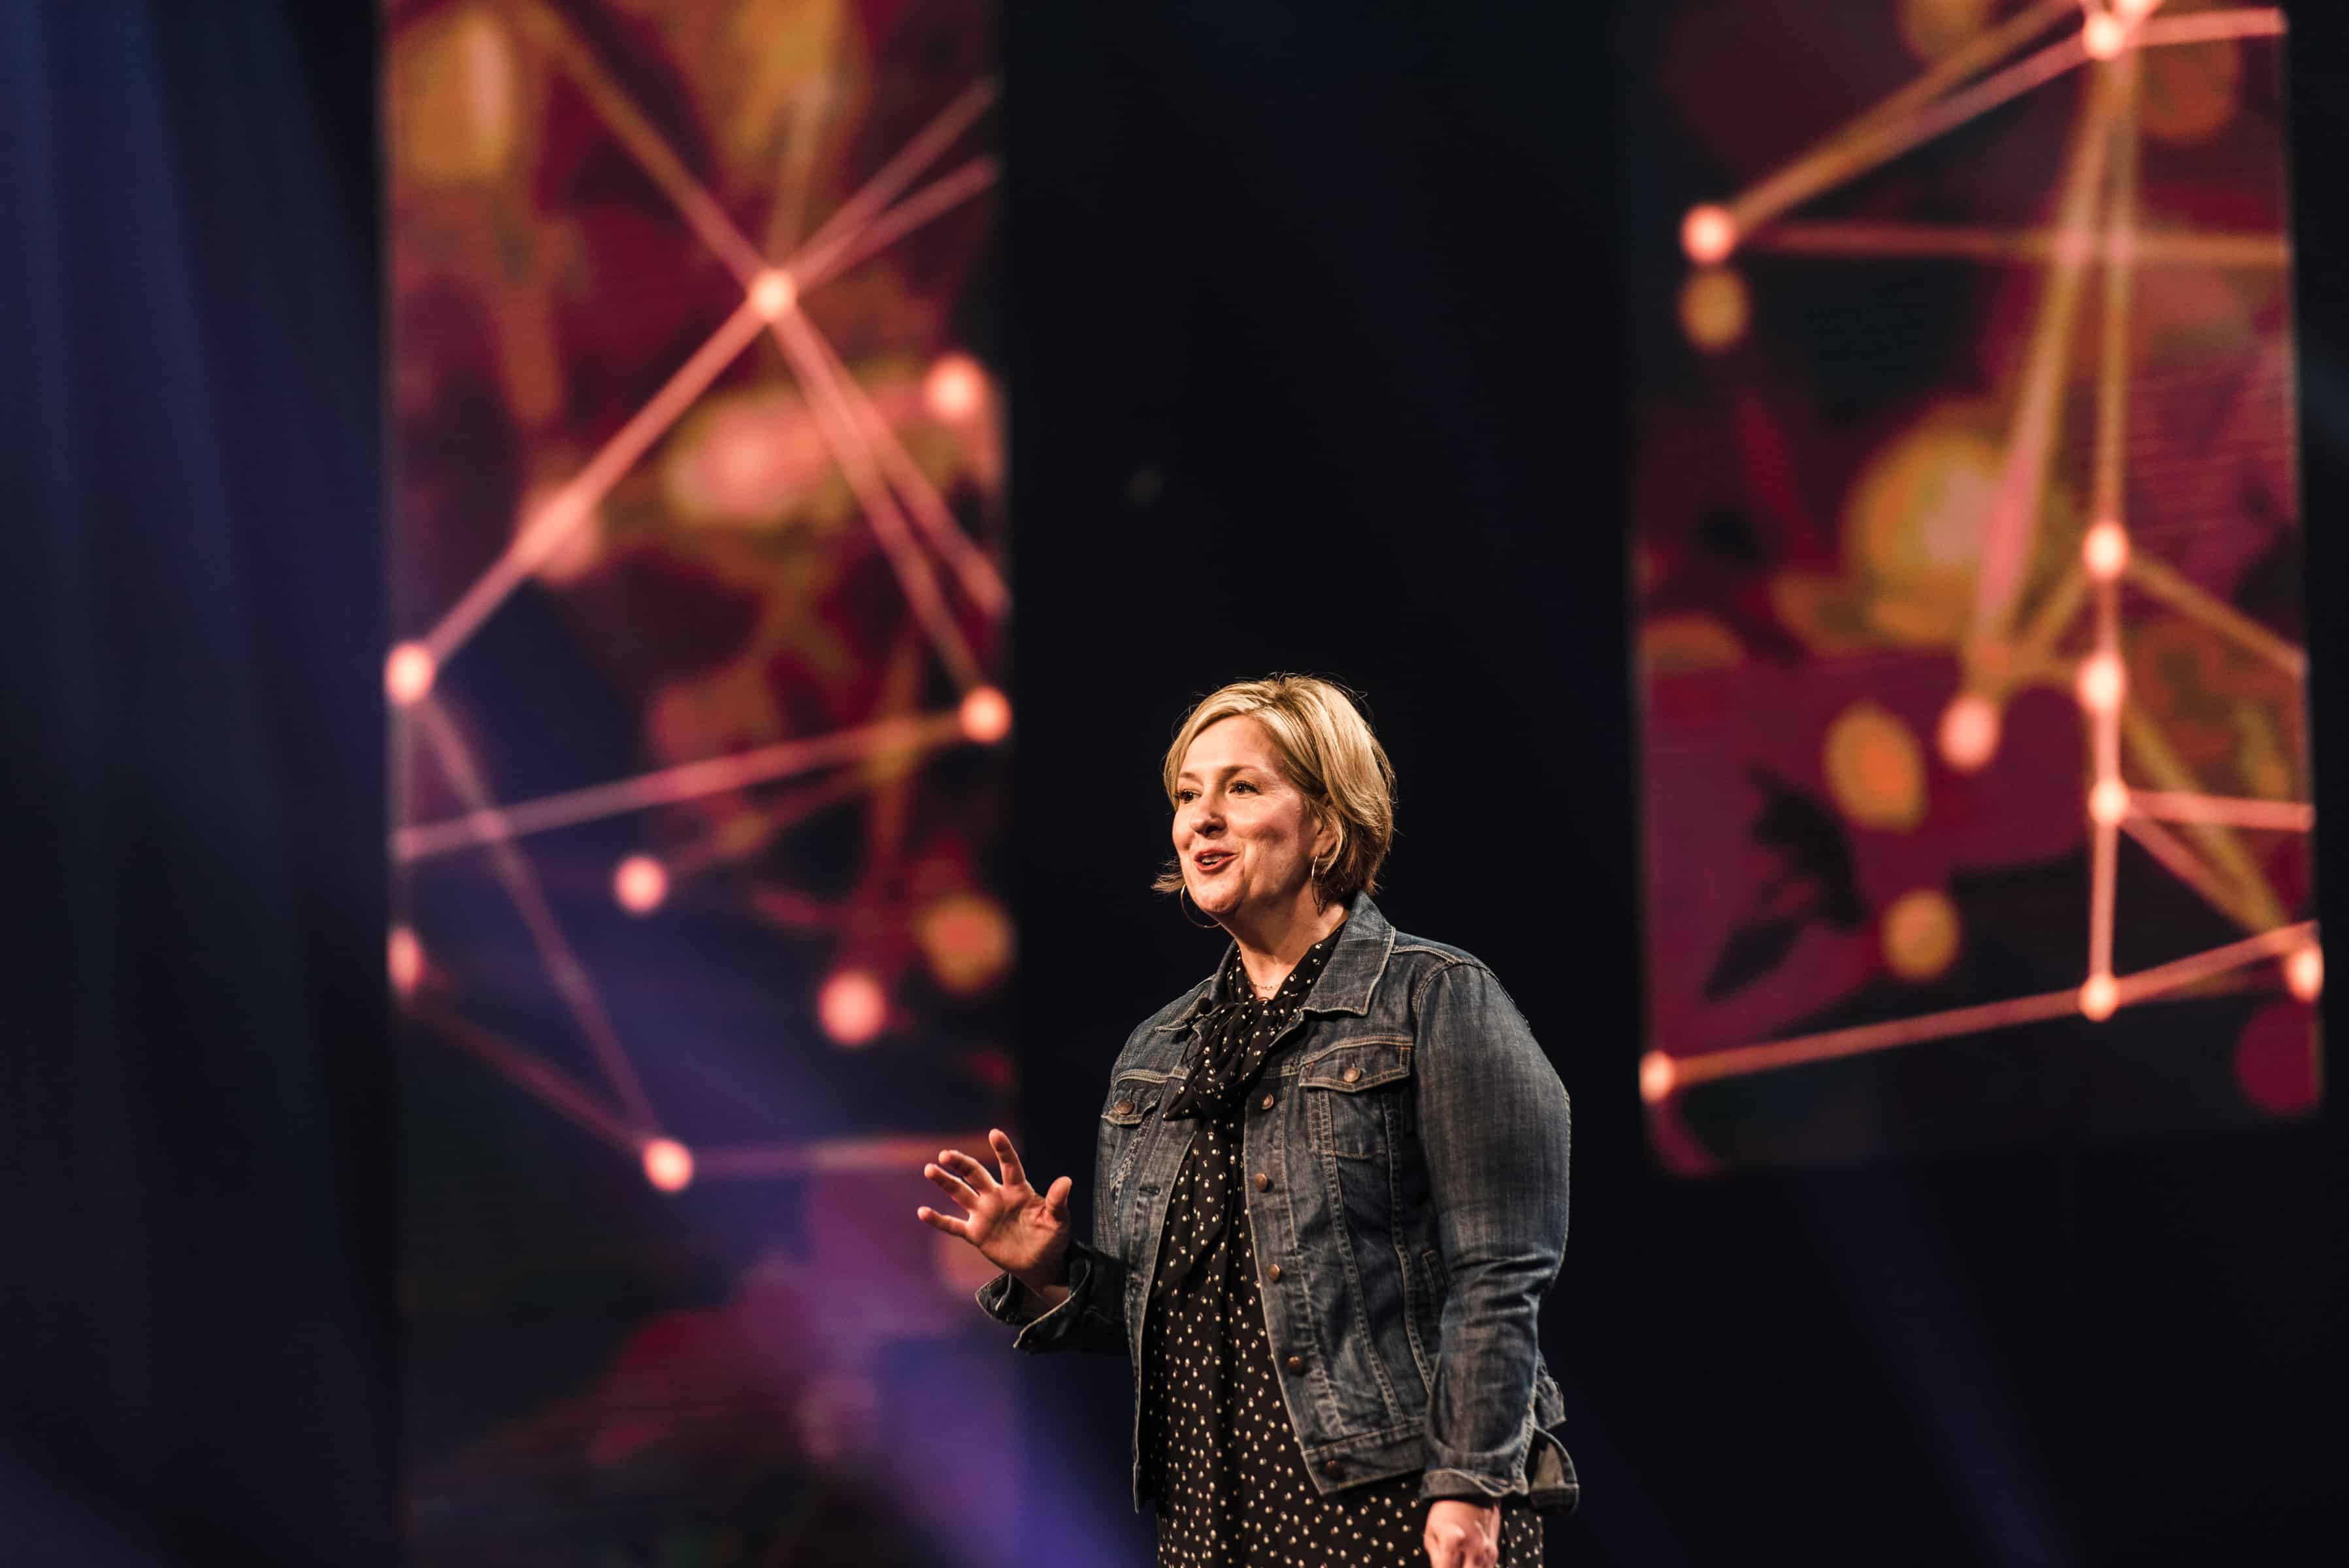 Leadership lessons from Brene Brown